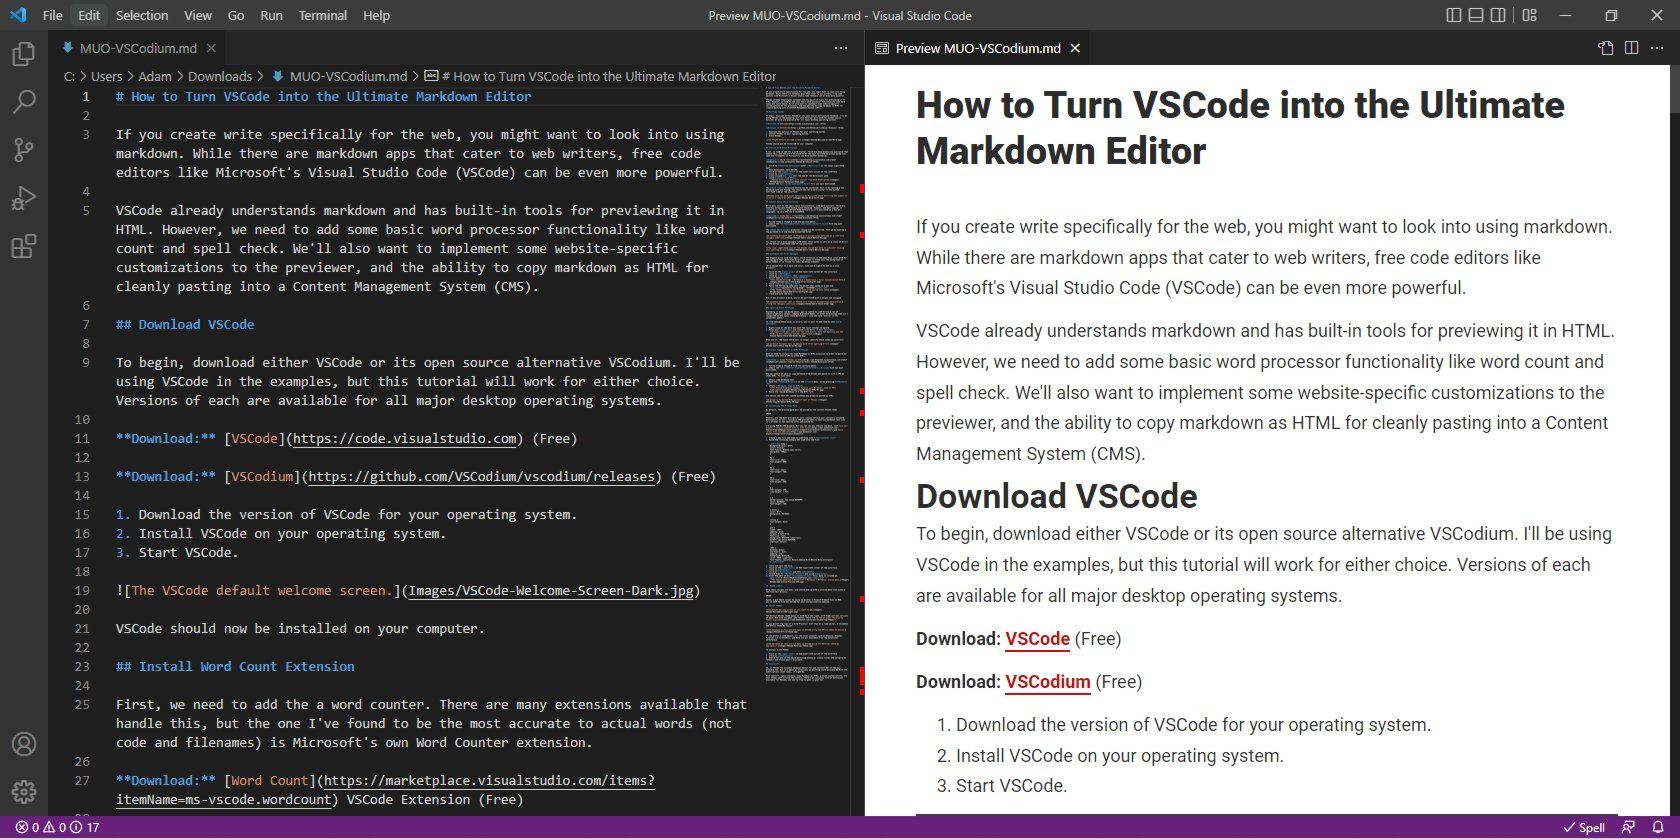 This article as a markdown file open in VSCode with the previewer customized to look like MUO.